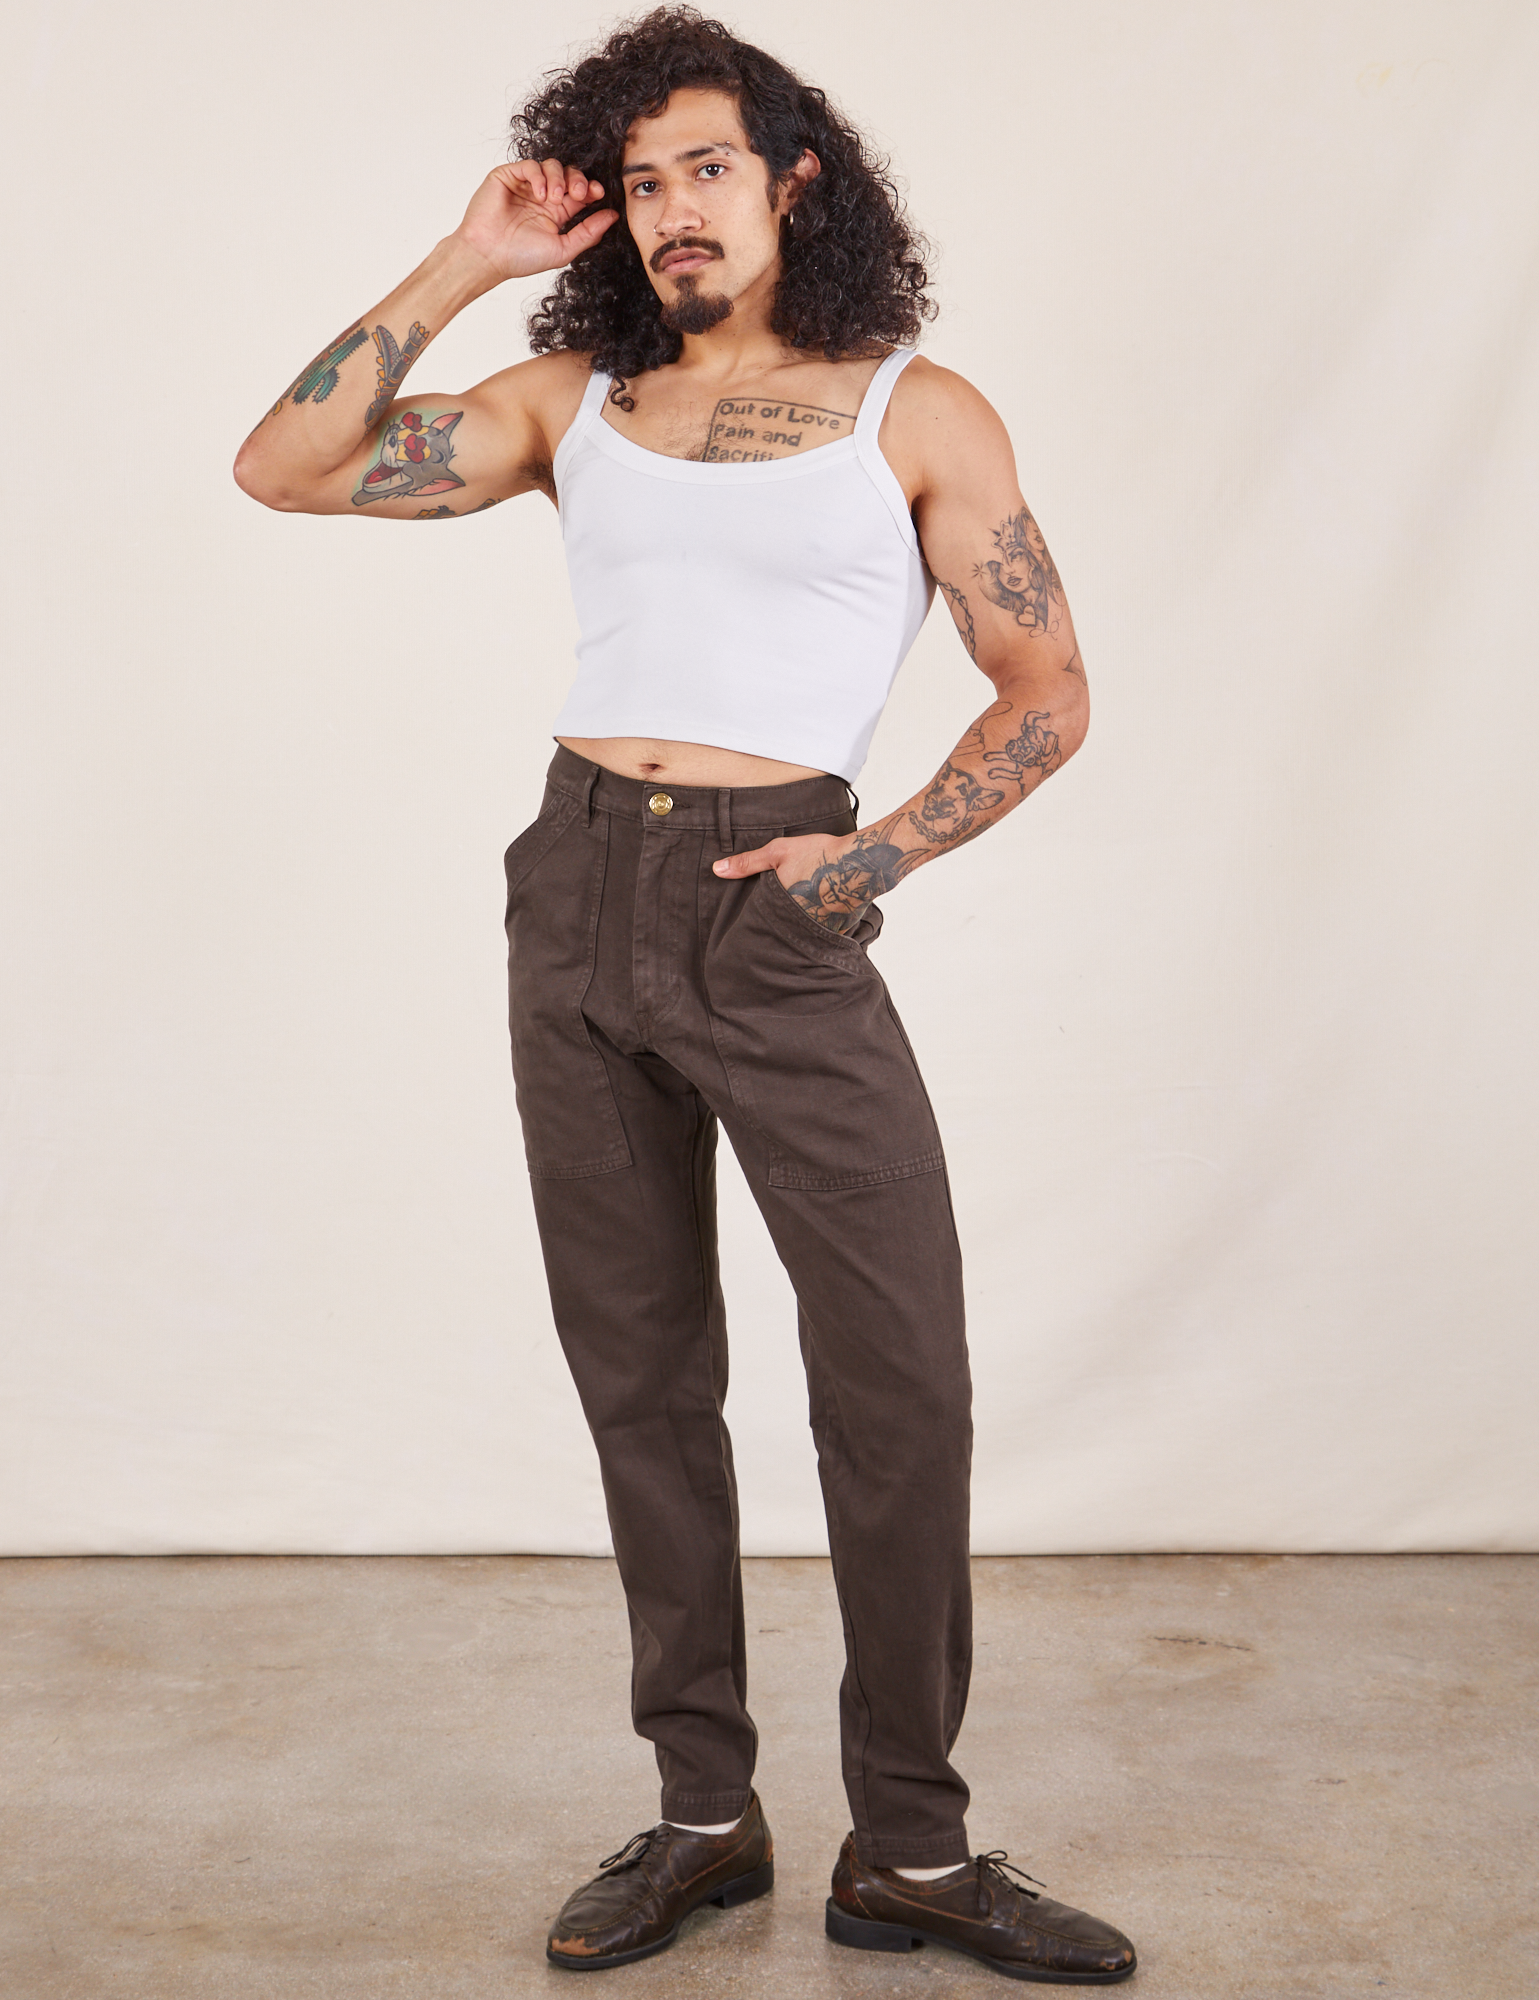 Jesse is 5'8" and wearing XS Pencil Pants in Espresso Brown paired with vintage off-white Cami